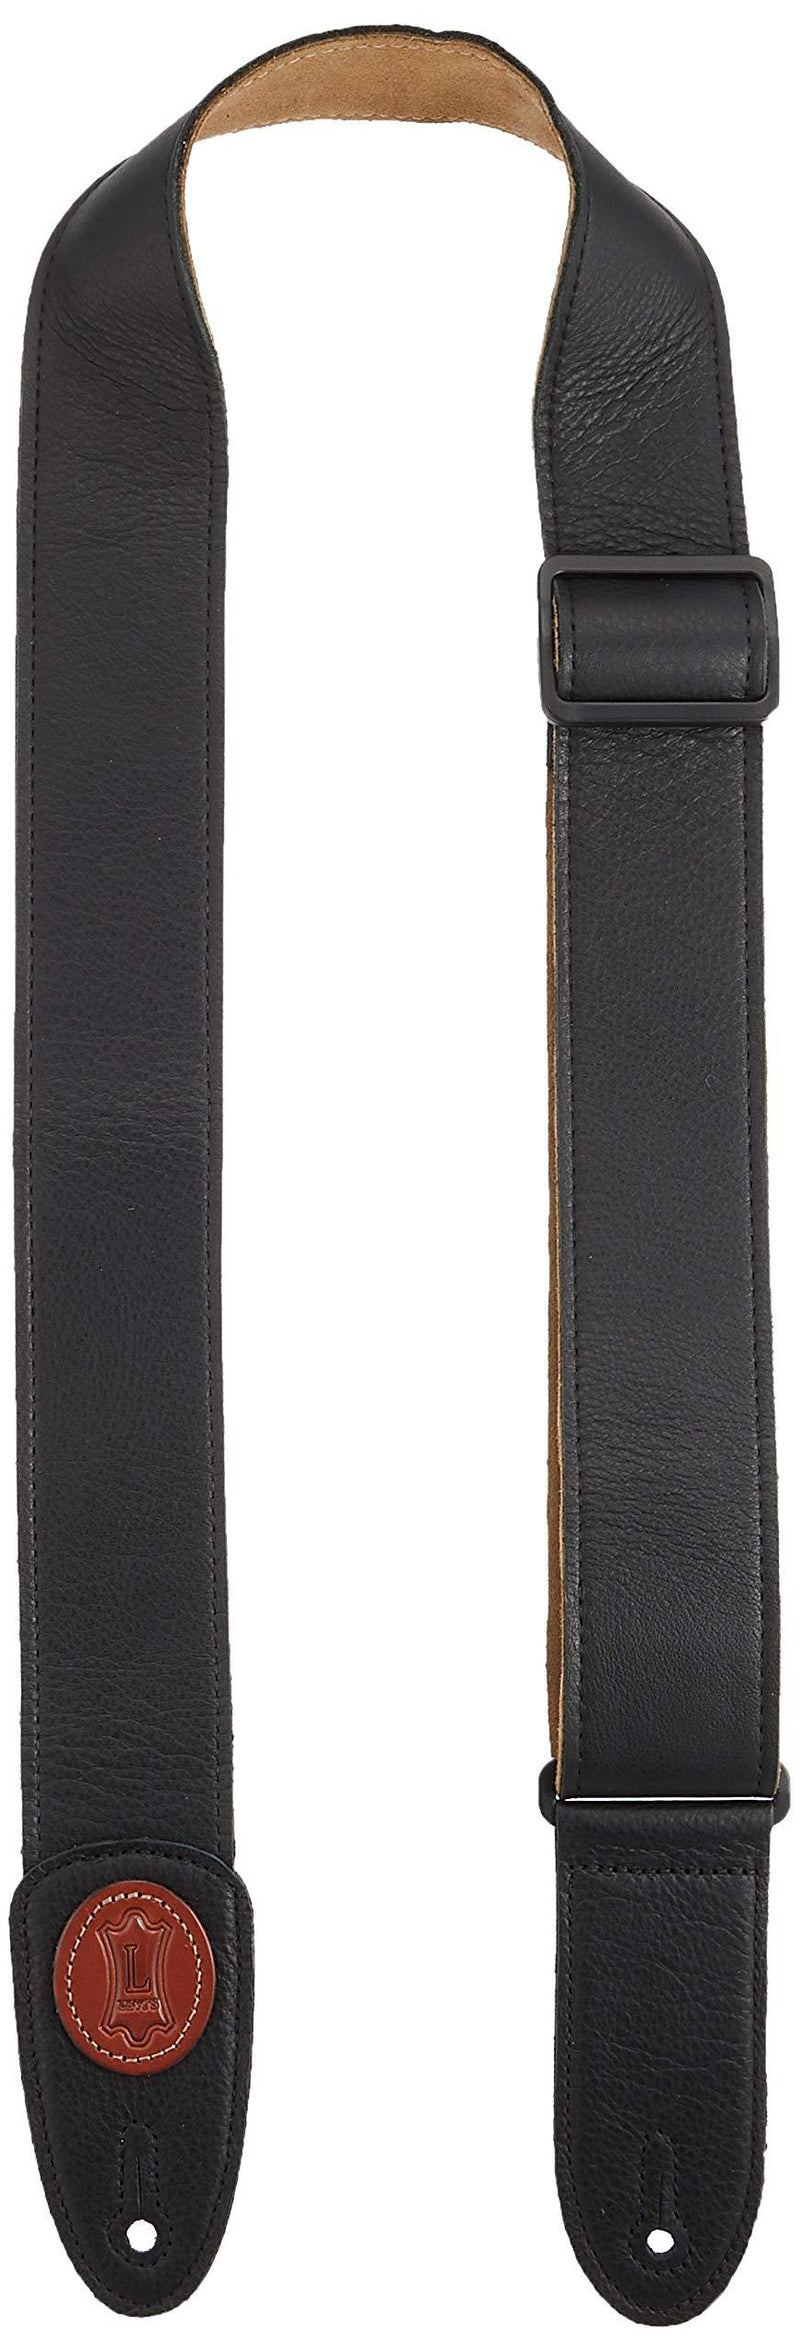 Levy's Leathers MSS7G-BLK Signature Series Garment Leather Guitar Strap, Black